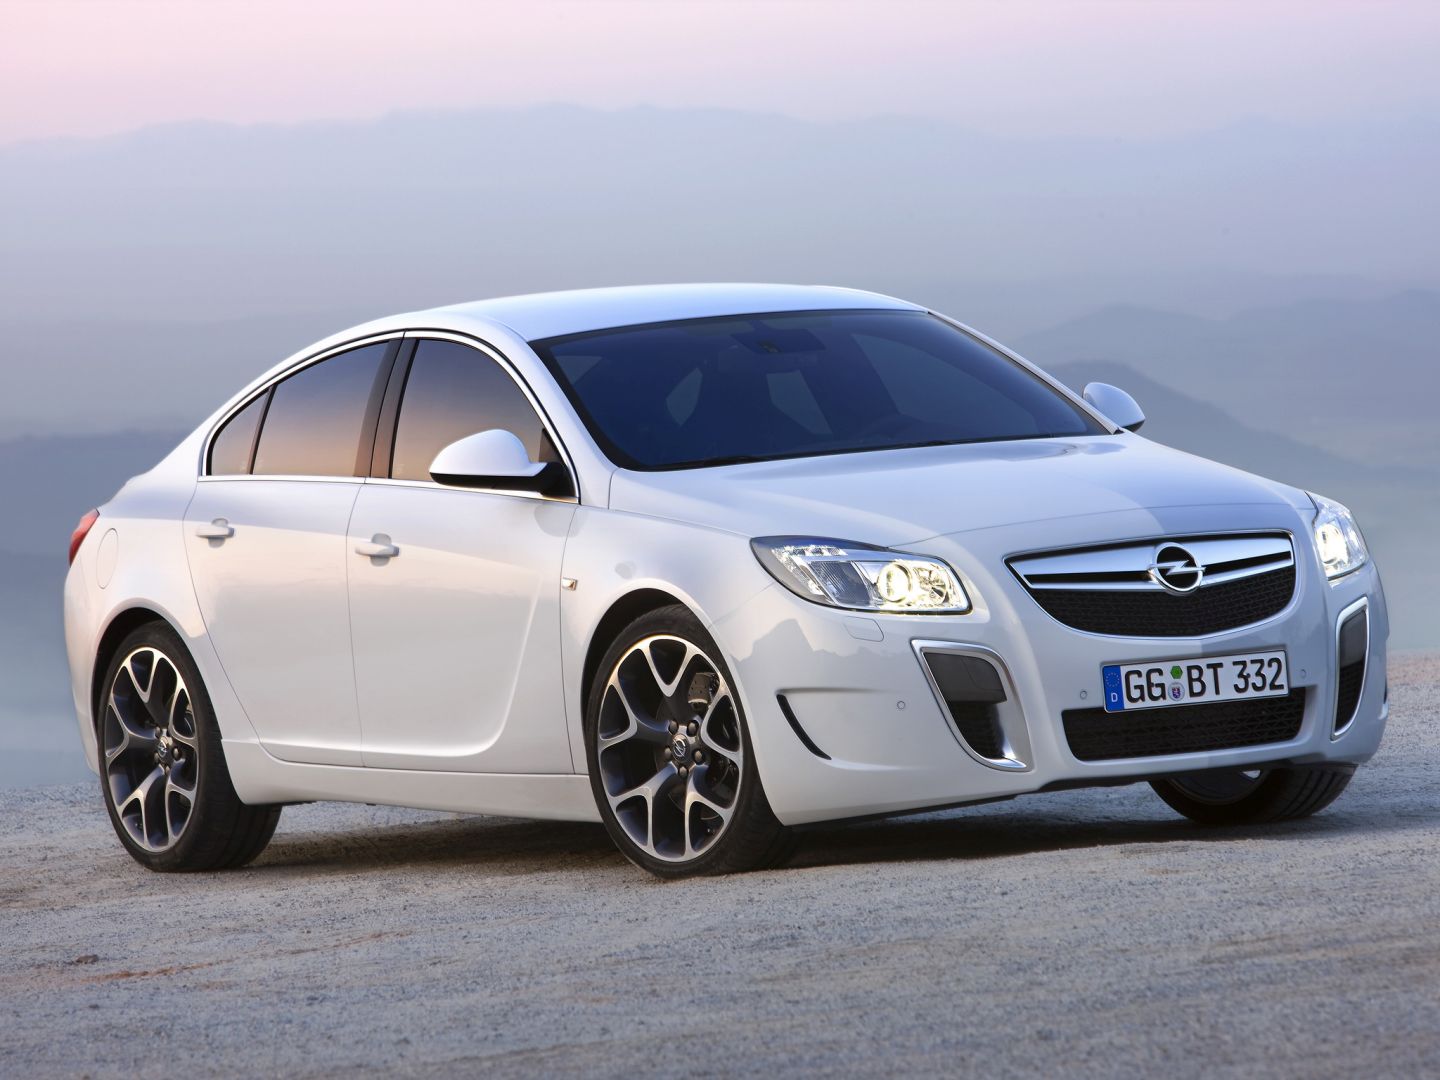 Fichiers Tuning Haute Qualité Opel Insignia 2.8 V6 Turbo 260hp